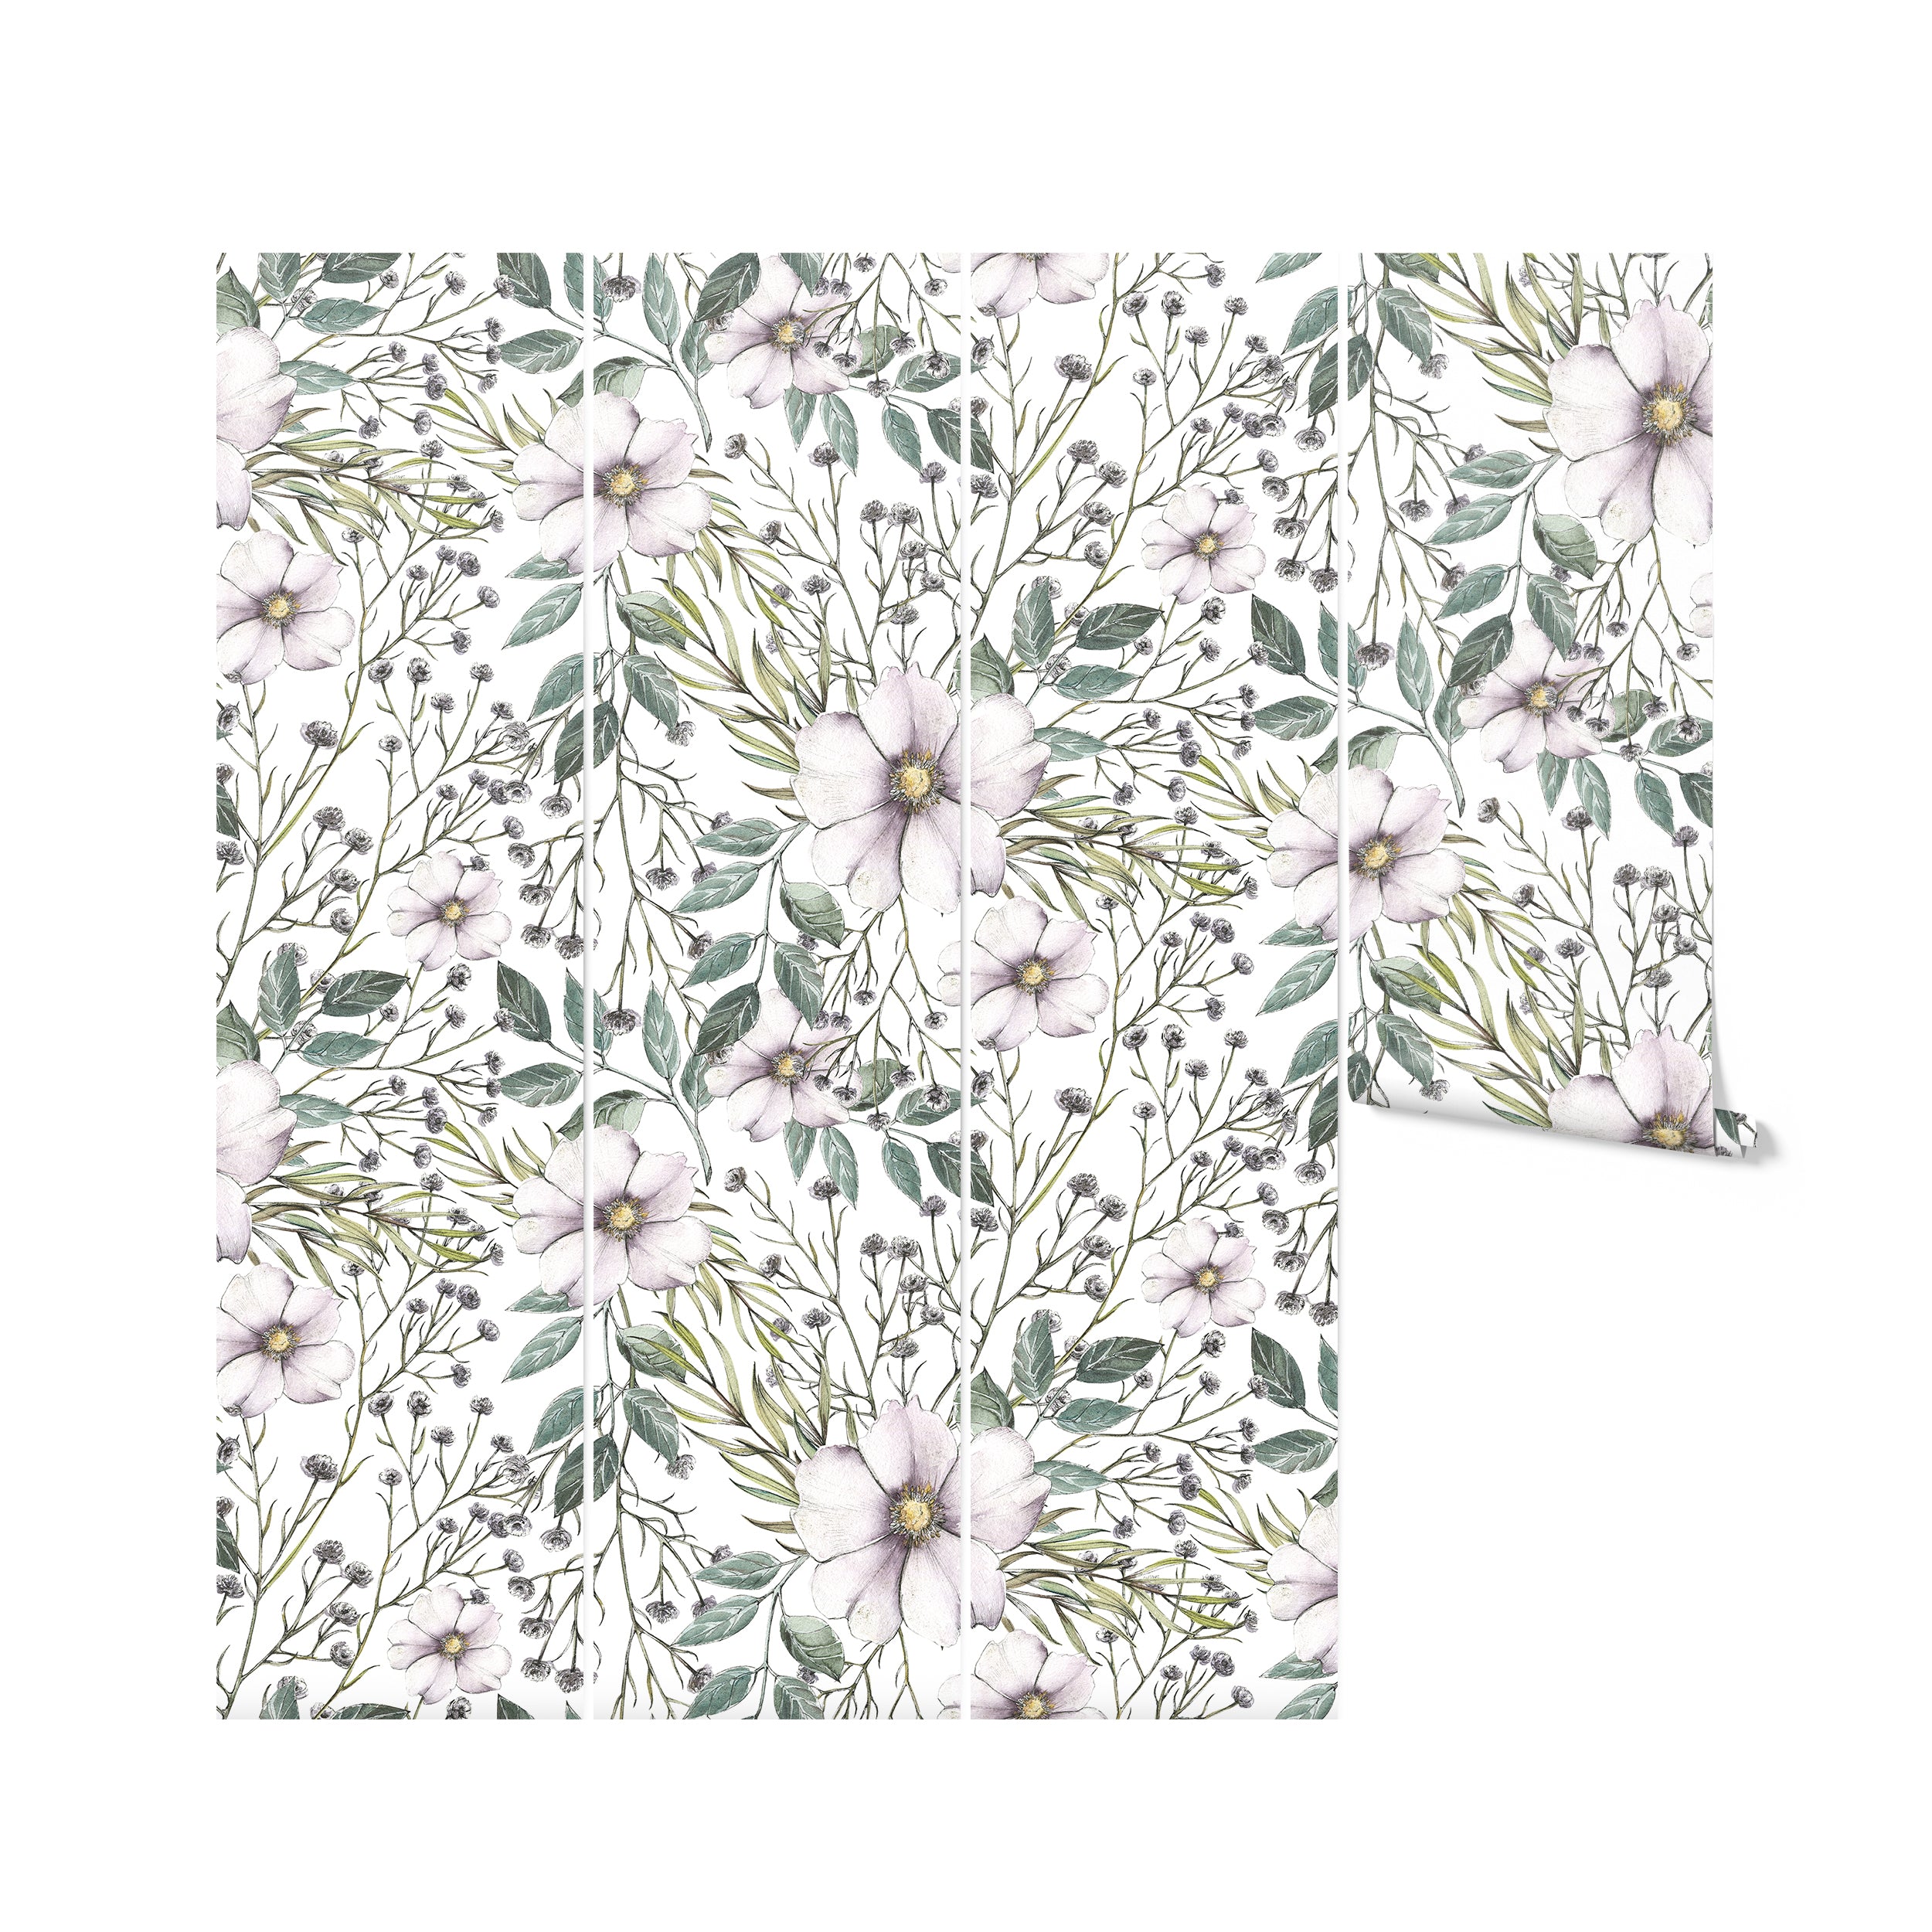 A roll of Botanical Wildflower Wallpaper II unrolled slightly to show the seamless, intricate design of purple wildflowers and greenery on a white background. This image highlights the wallpaper’s potential to create a vivid, naturalistic feel in interior spaces.